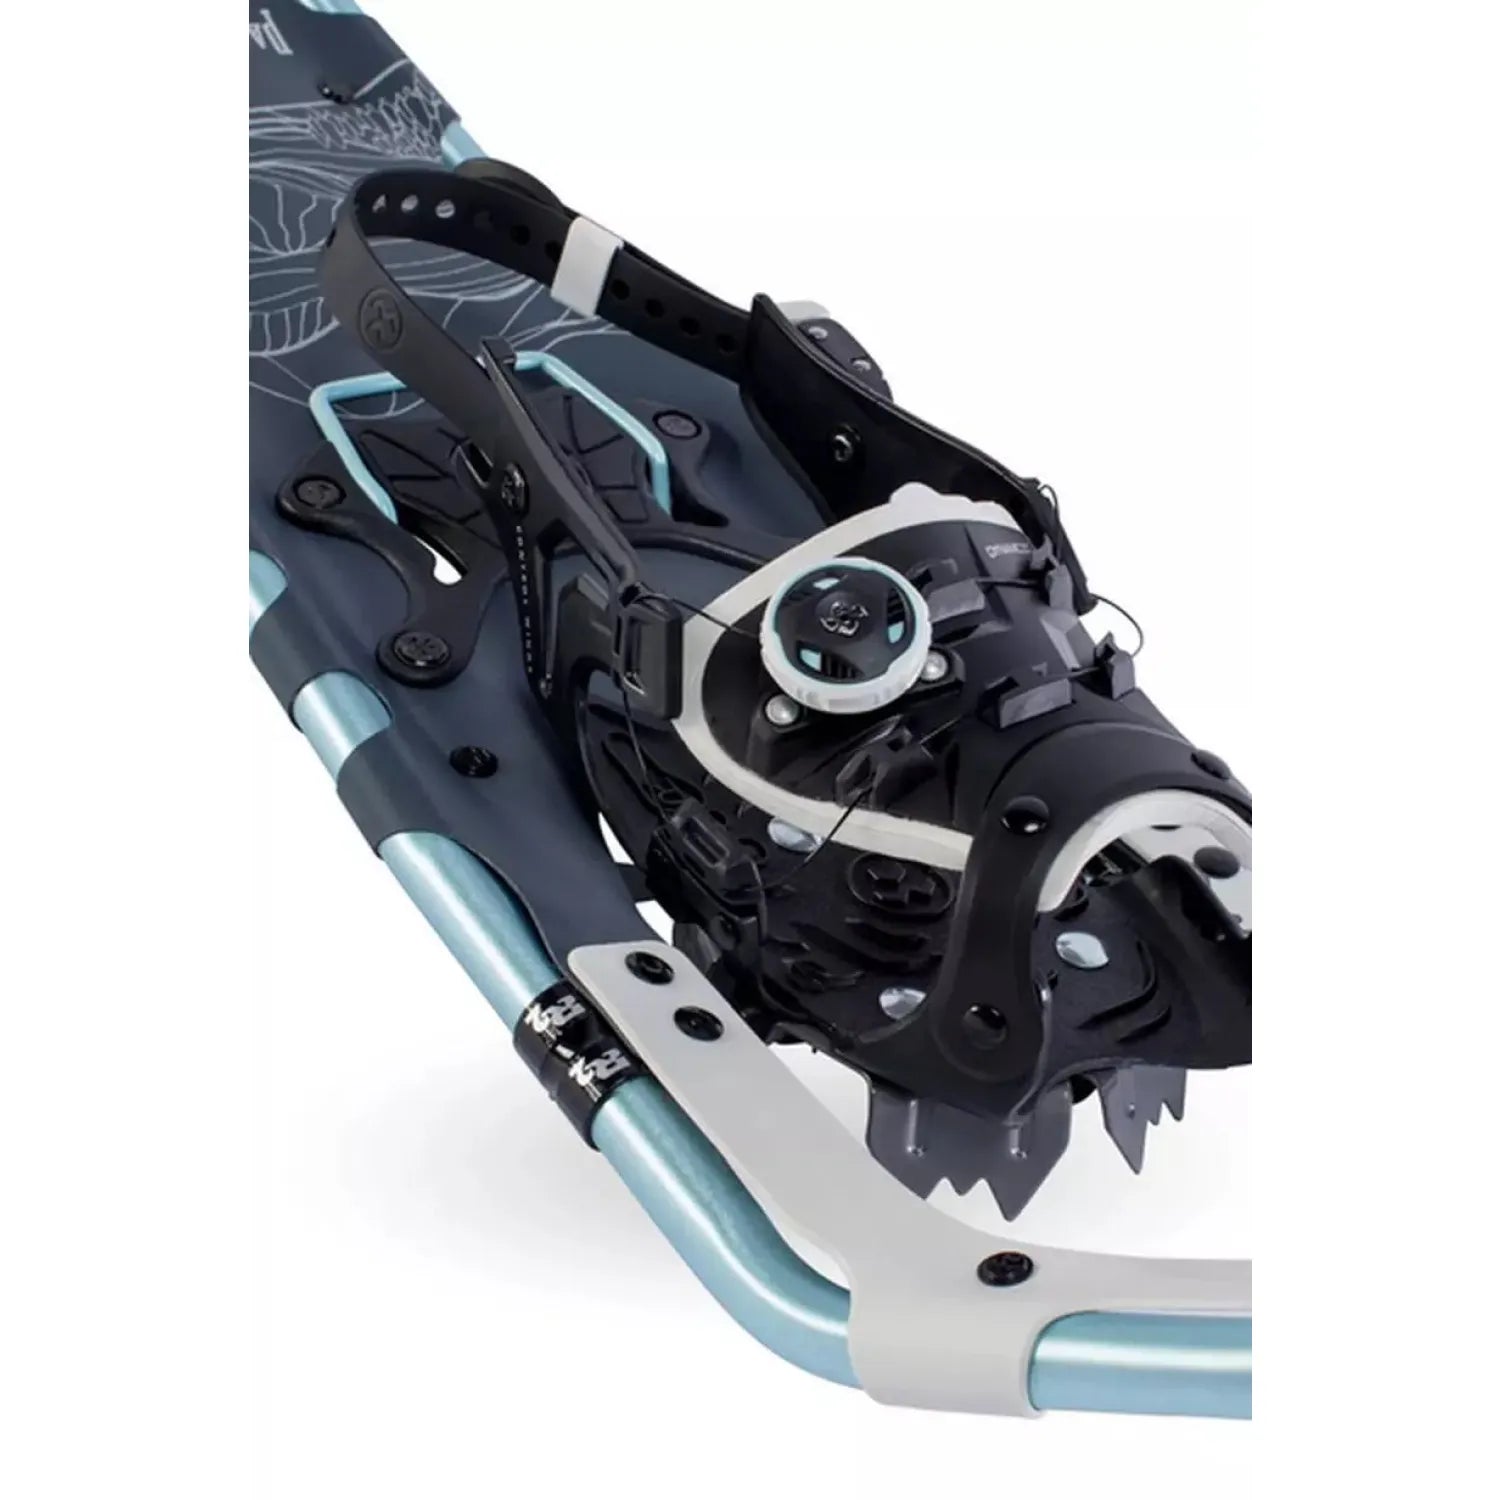 Tubbs Women's Panoramic 25" Snowshoe in Ice Blue and Grey, detailed view of straps and boa system.